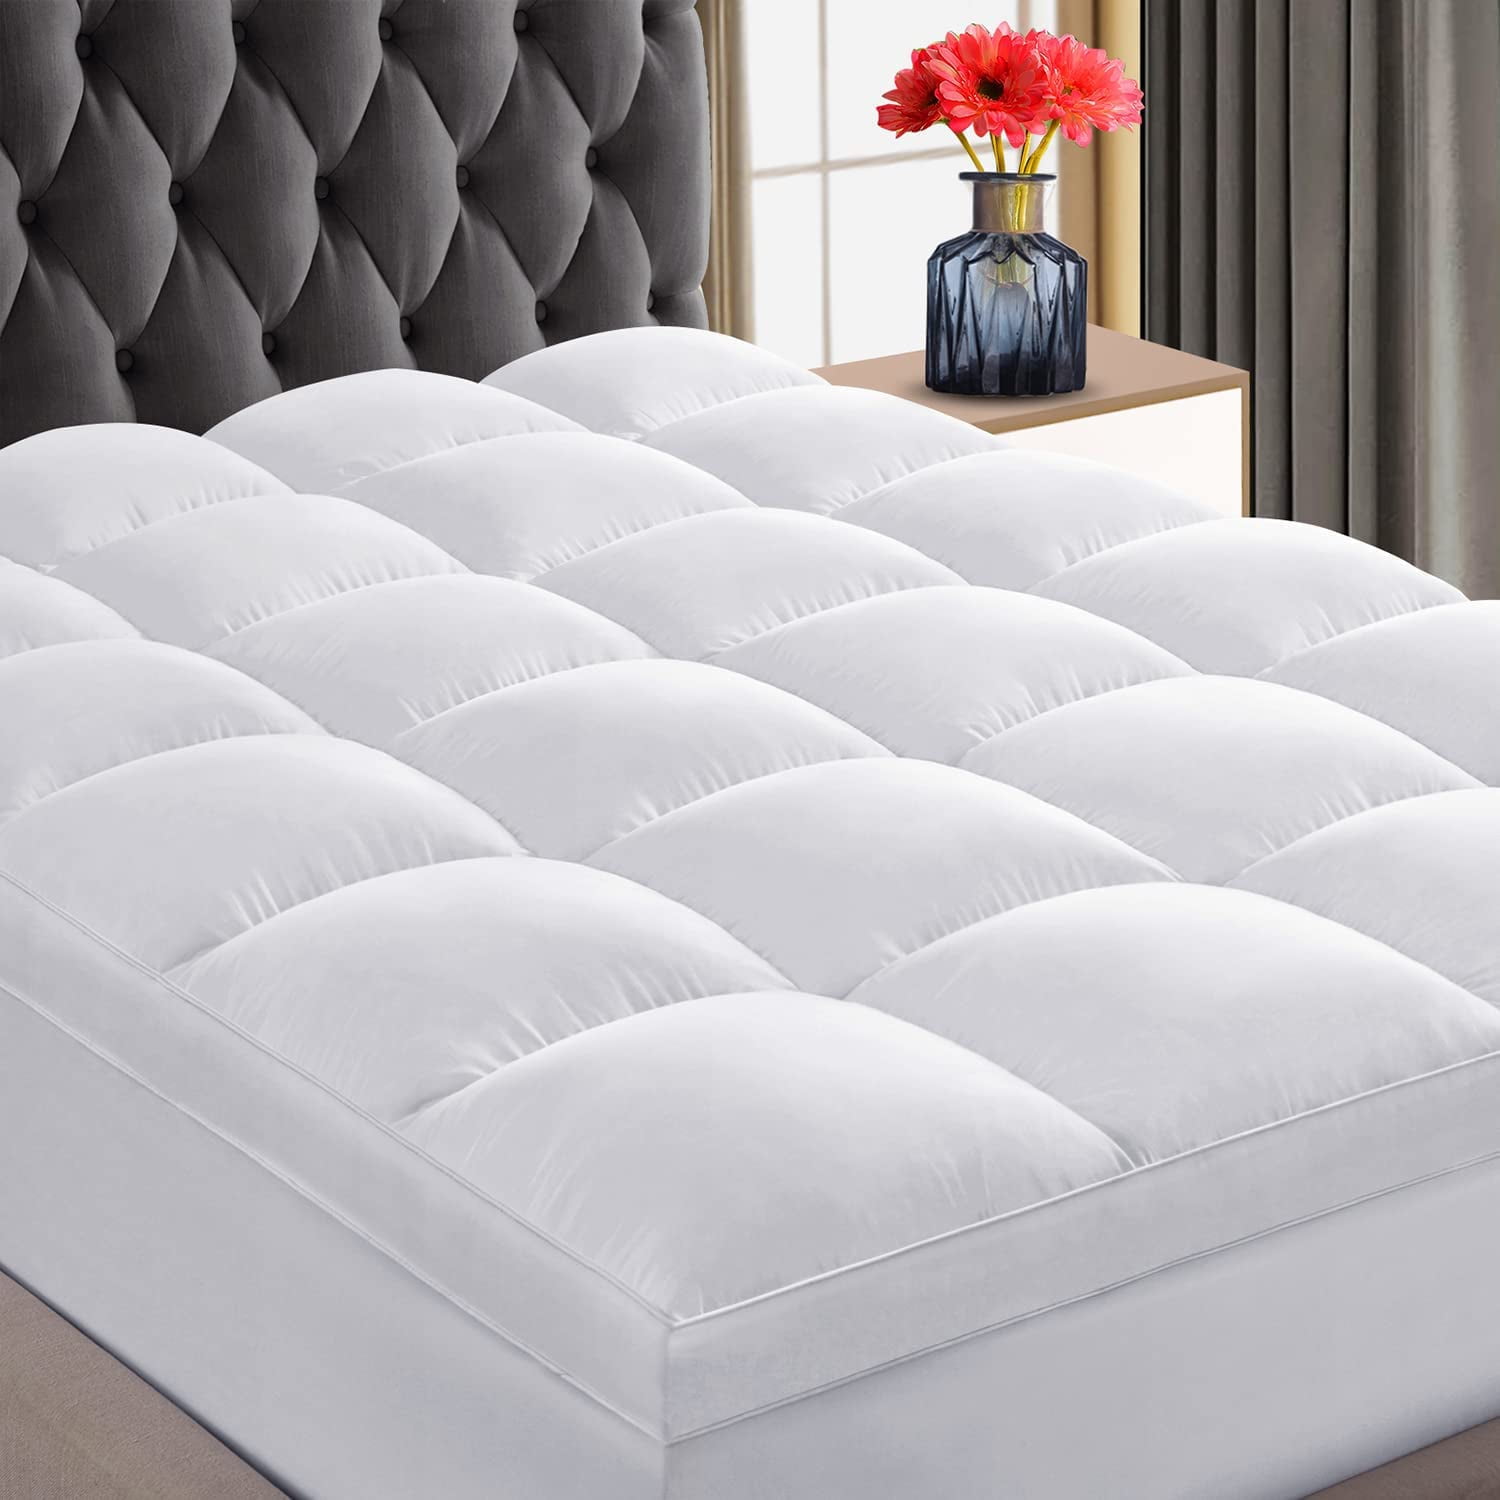 MERITLIFE Queen Extra Thick Mattress Topper, 400TC Cotton Pillow Top  Protector with 8-21 Deep Pocket 5D Spiral Fiber Padding for Back Pain,  Cooling Plush Mattress Pad Cover, White 